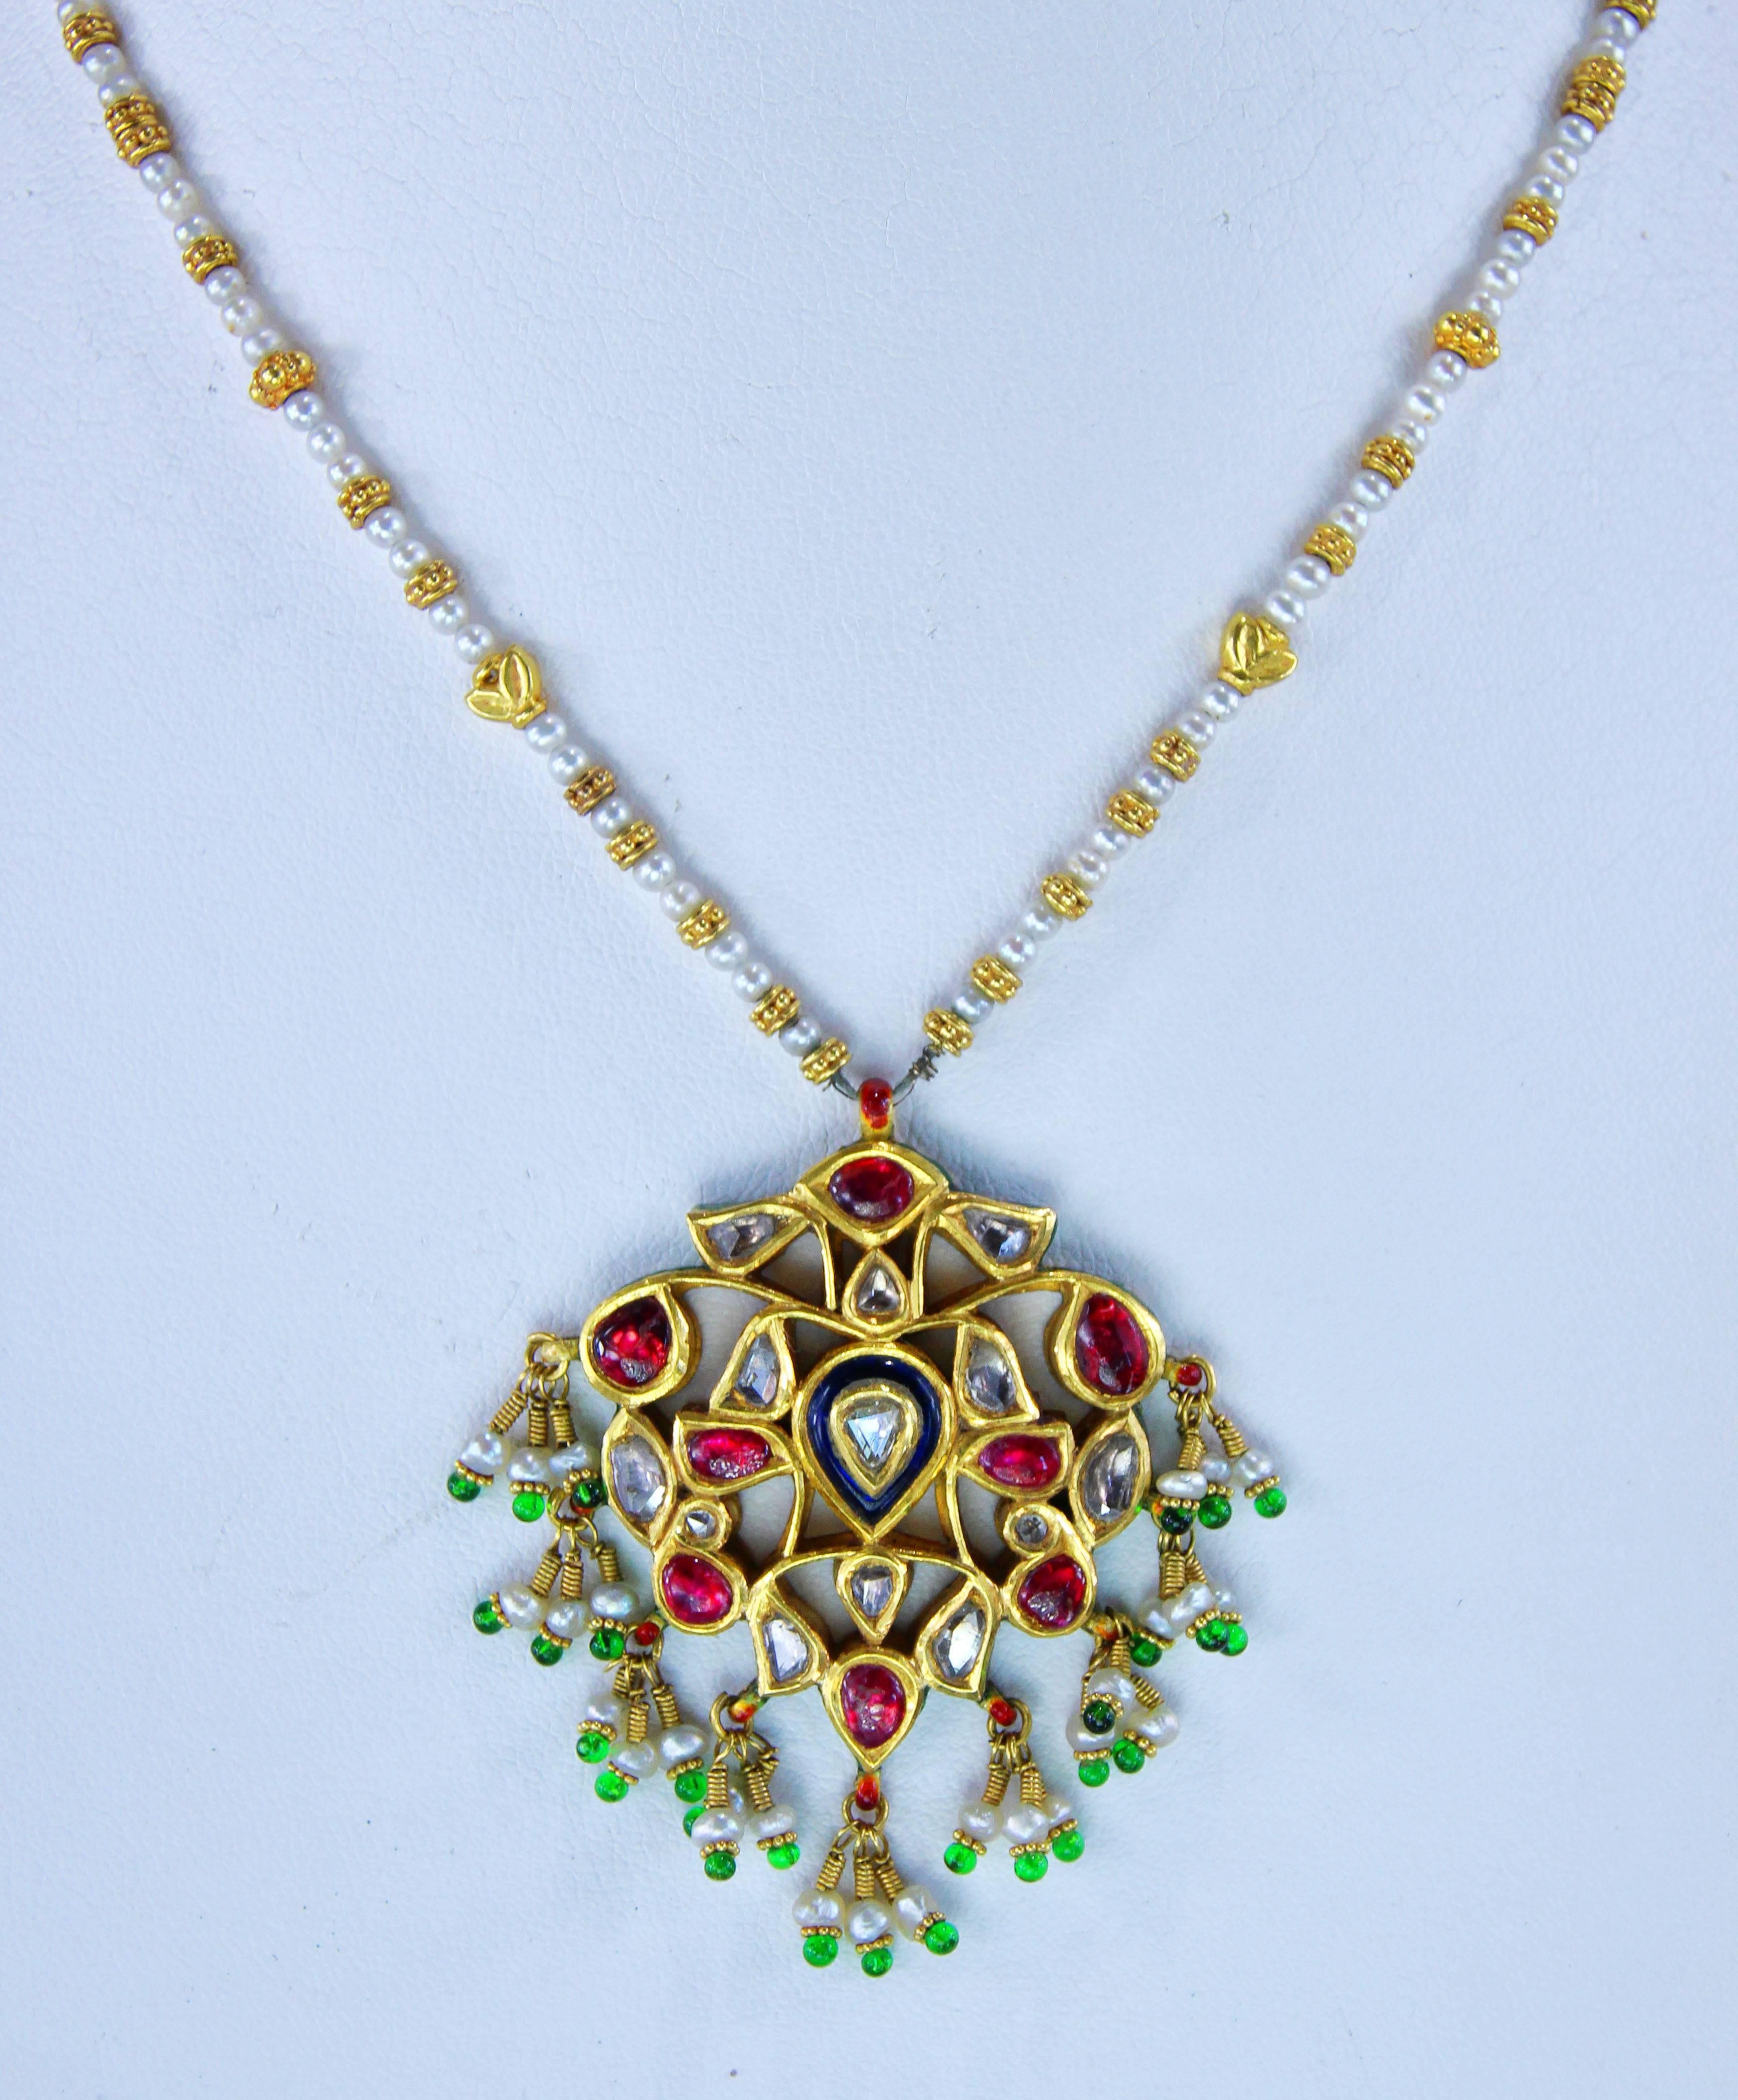 Necklace made in India, set with rose cut diamonds, seed pearls, semi-precious stones and enamel. Necklace is reversible, and is 15 inches long.